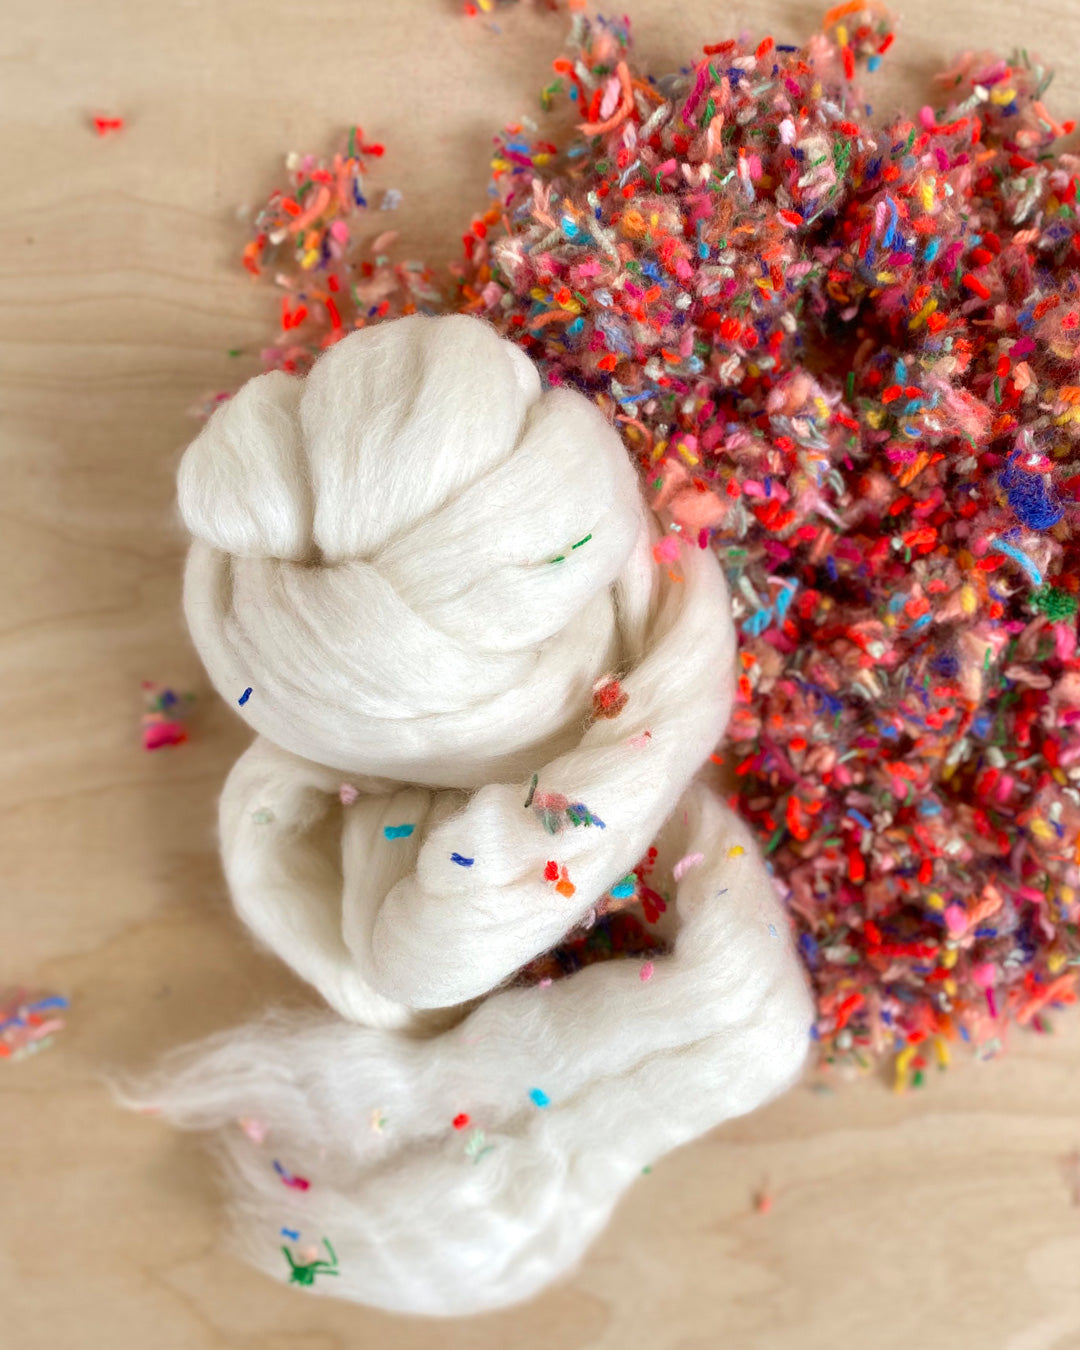 Close-up of white wool roving with flecks of colorful felting pieces, capturing the texture and detail of materials.